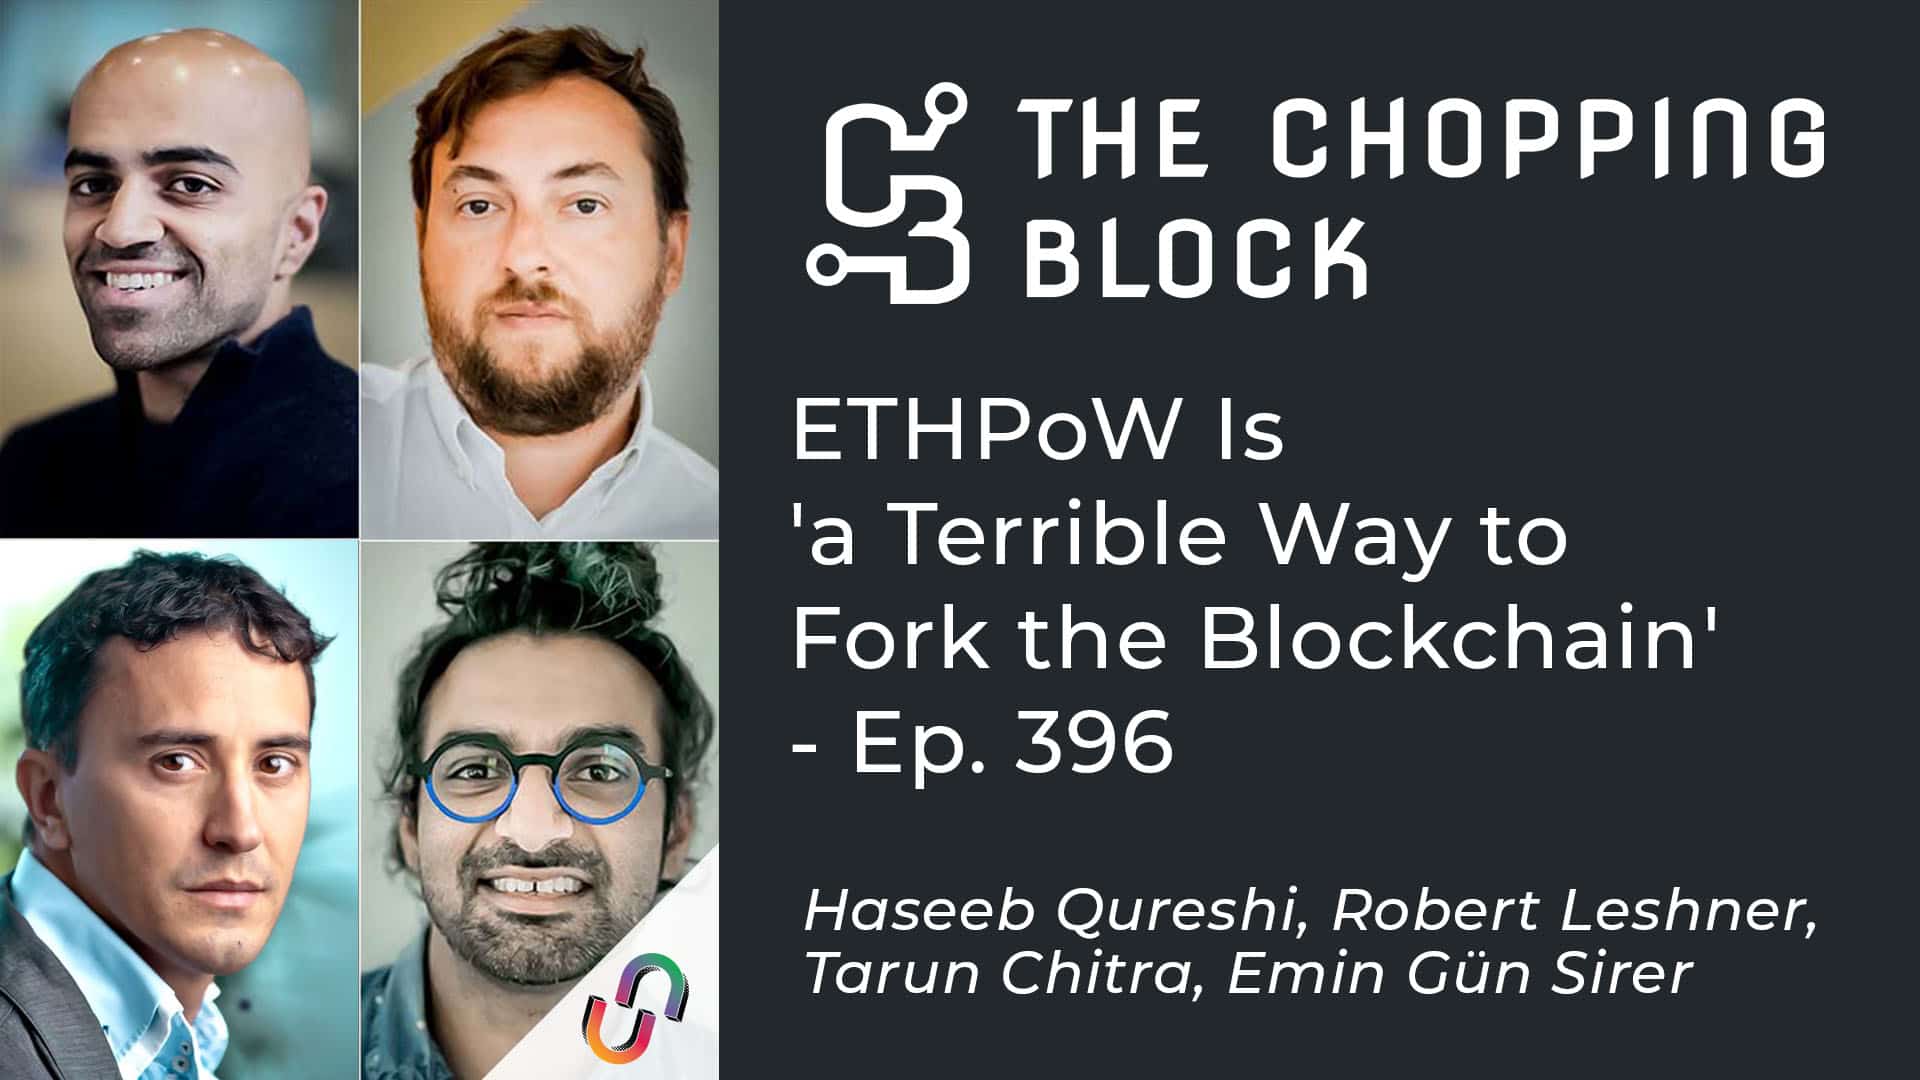 The Chopping Block: ETHPoW Is ‘a Terrible Way to Fork the Blockchain episode by Haseeb Qureshi, Robert Leshner, Tarun Chitra, and Emin Gün Sirer.